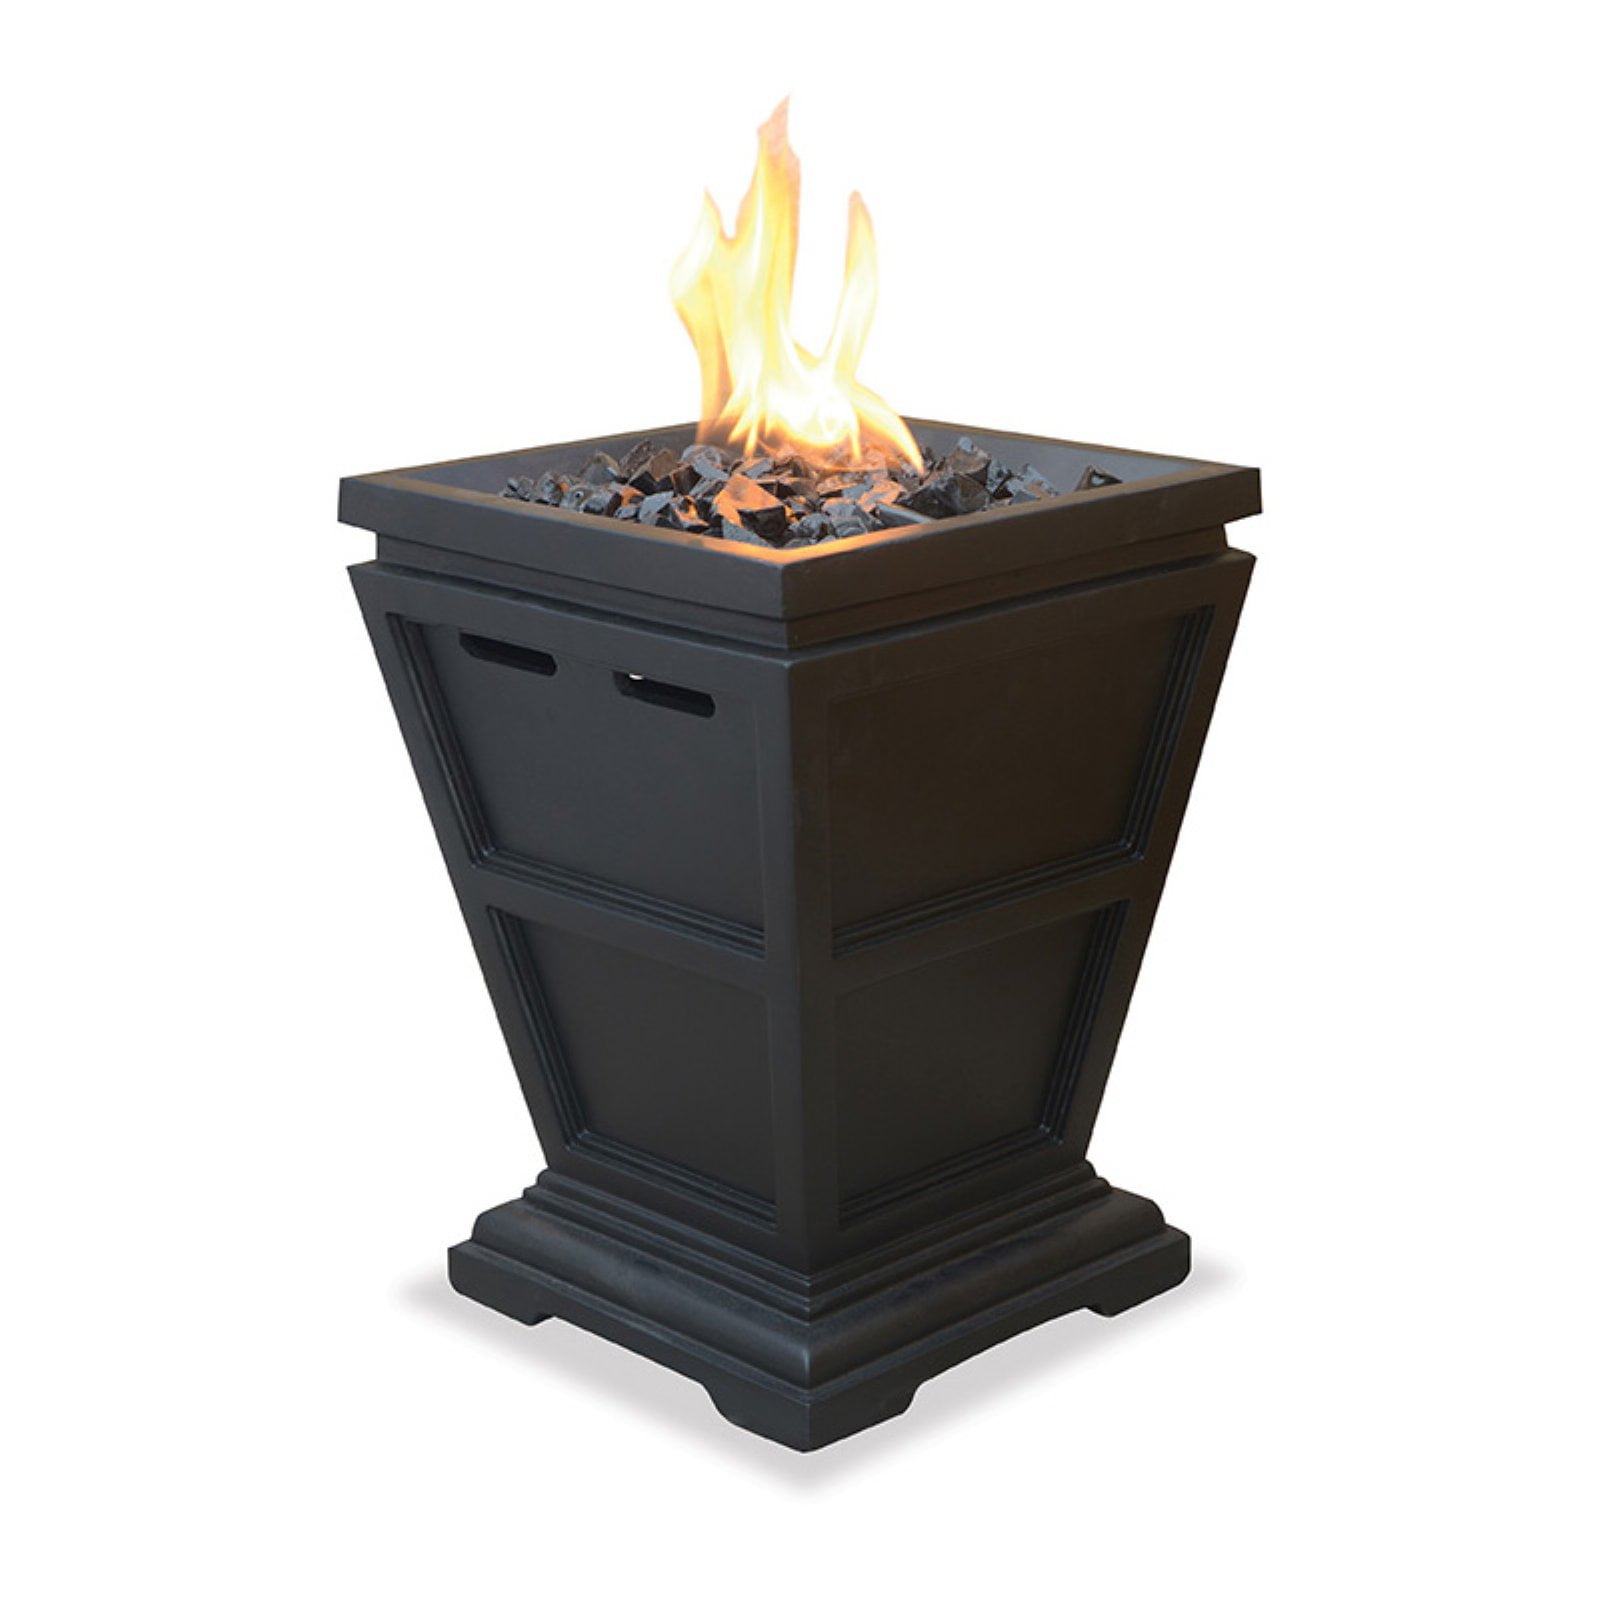 Uniflame Lp Gas Fire Pit Tabletop, Small Fire Pits For Decks